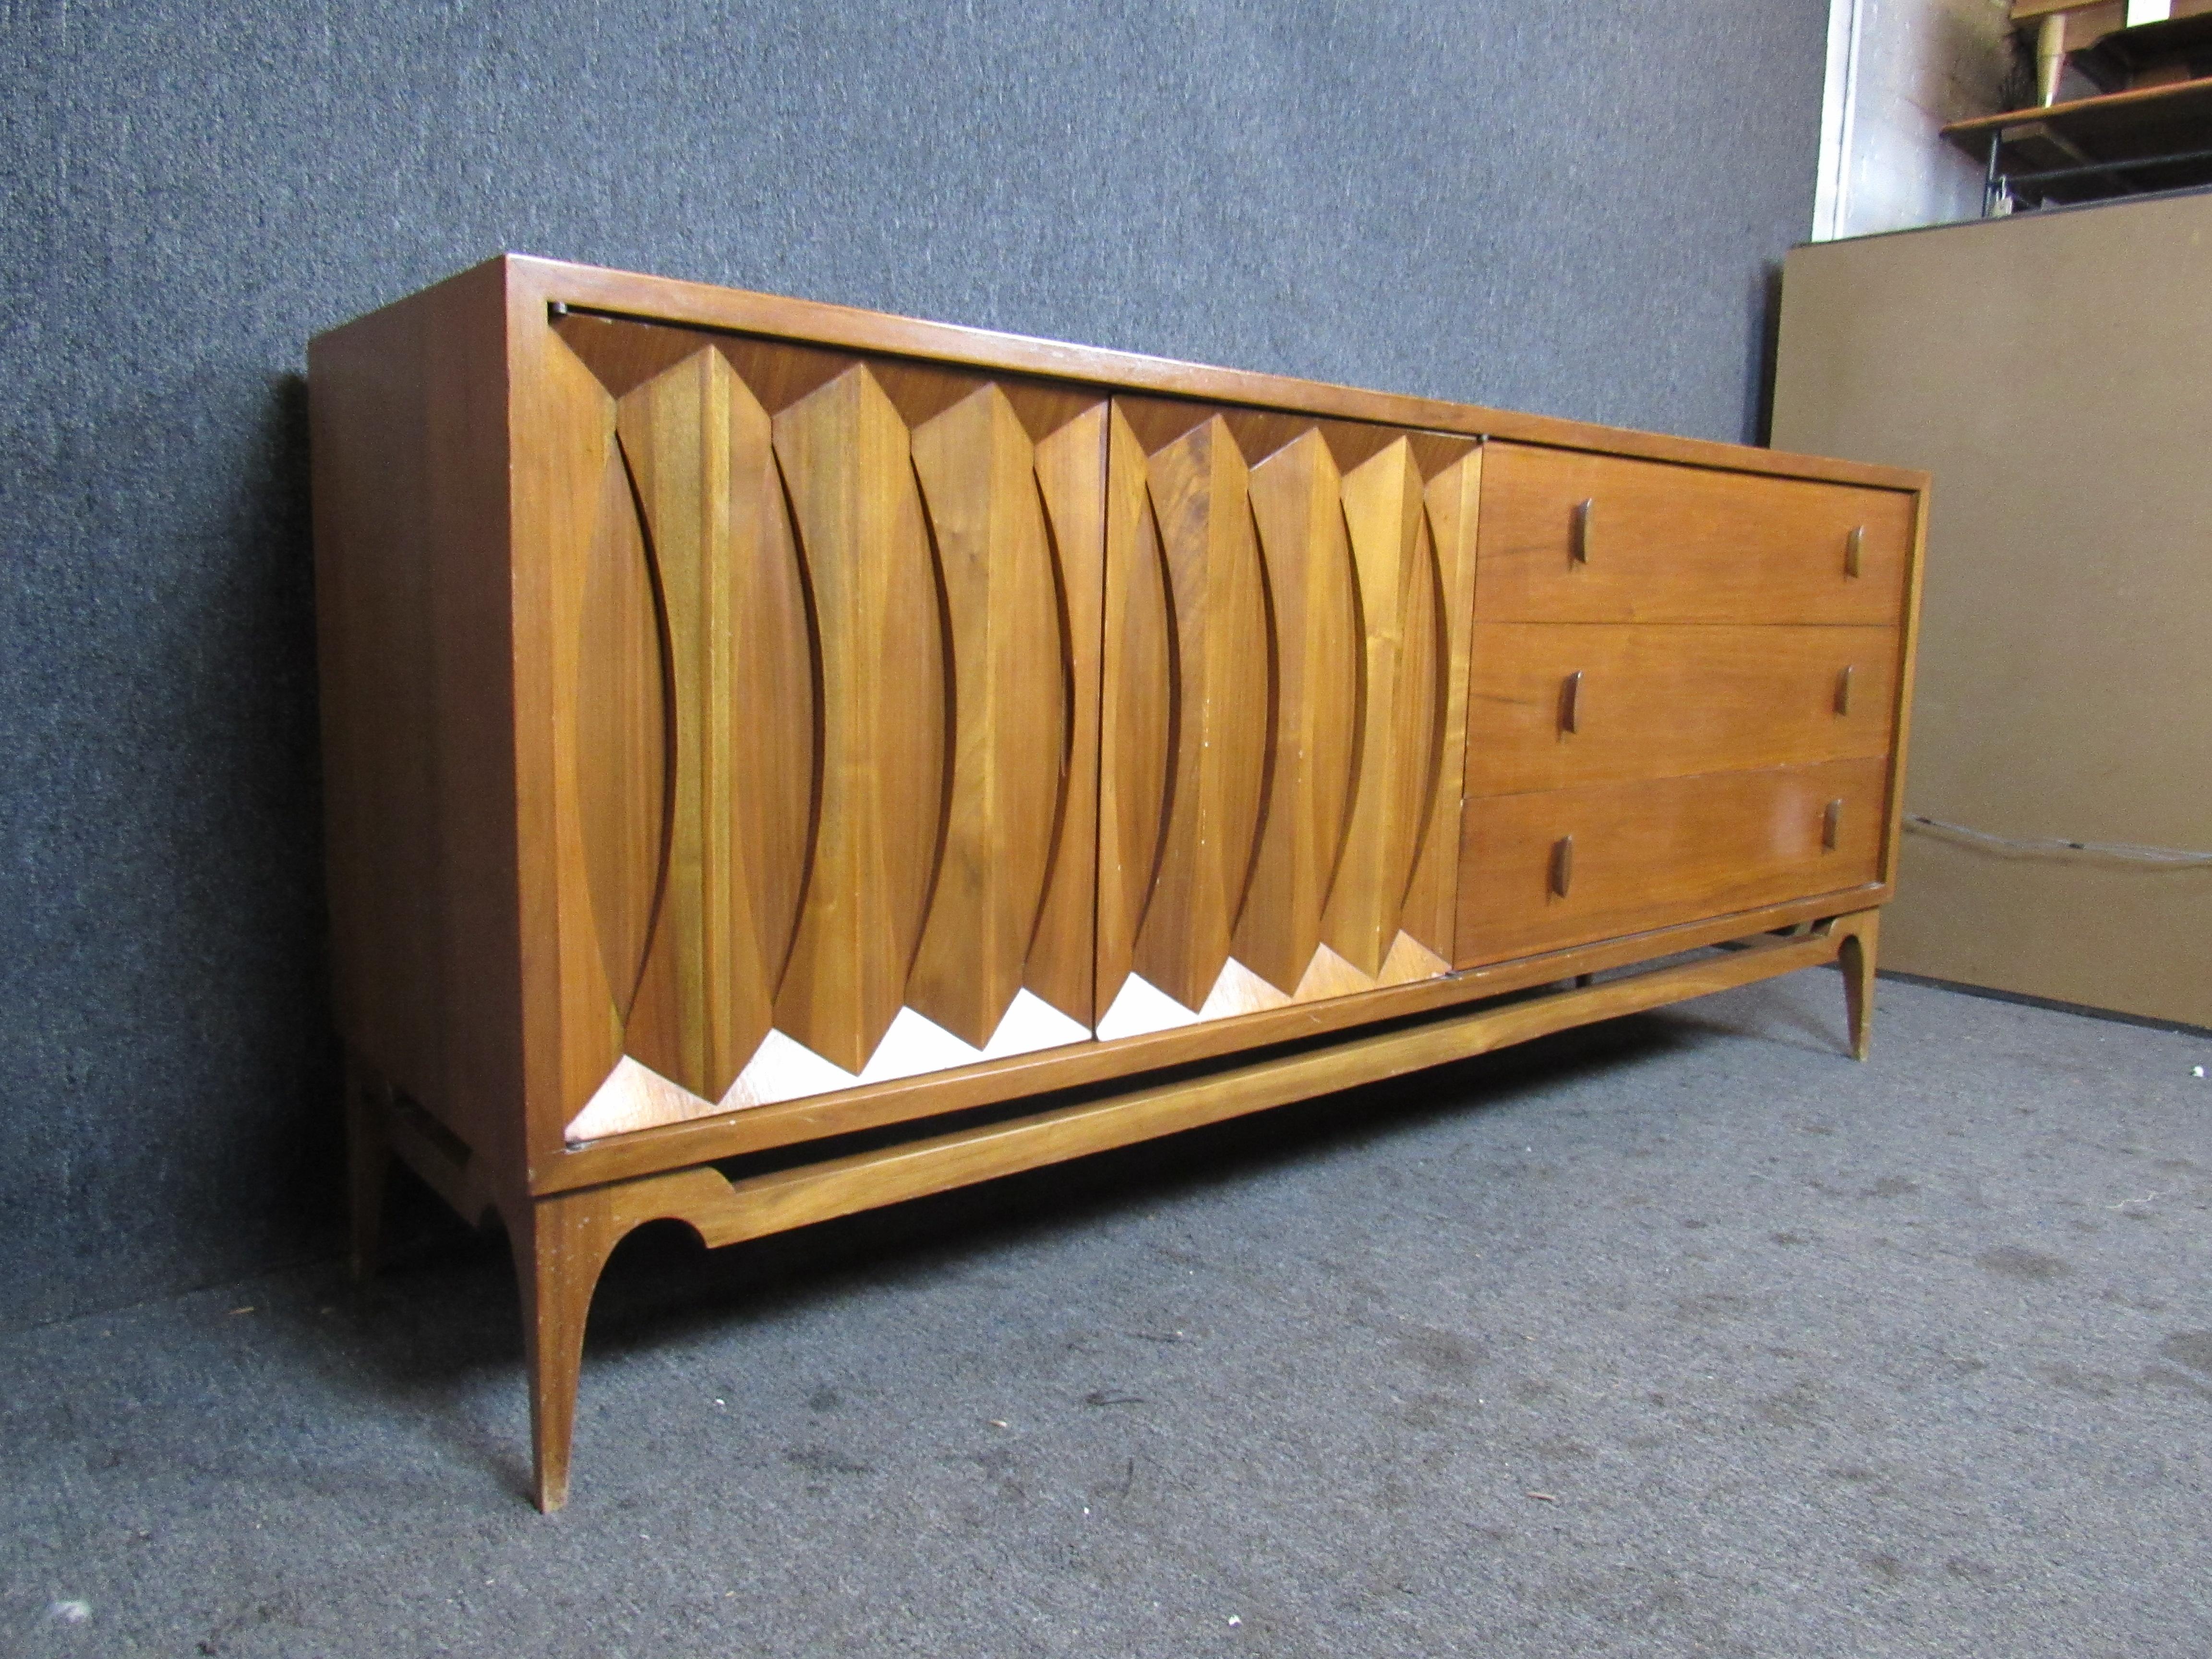 Endlessly interesting vintage Mid-Century Modern walnut credenza with fantastic sculpted details. Two side doors feature a panel of carved bowties reminiscent of the Classic Broyhill Brasilia and Kent Coffey Perspecta lines of the 1950s and '60s.